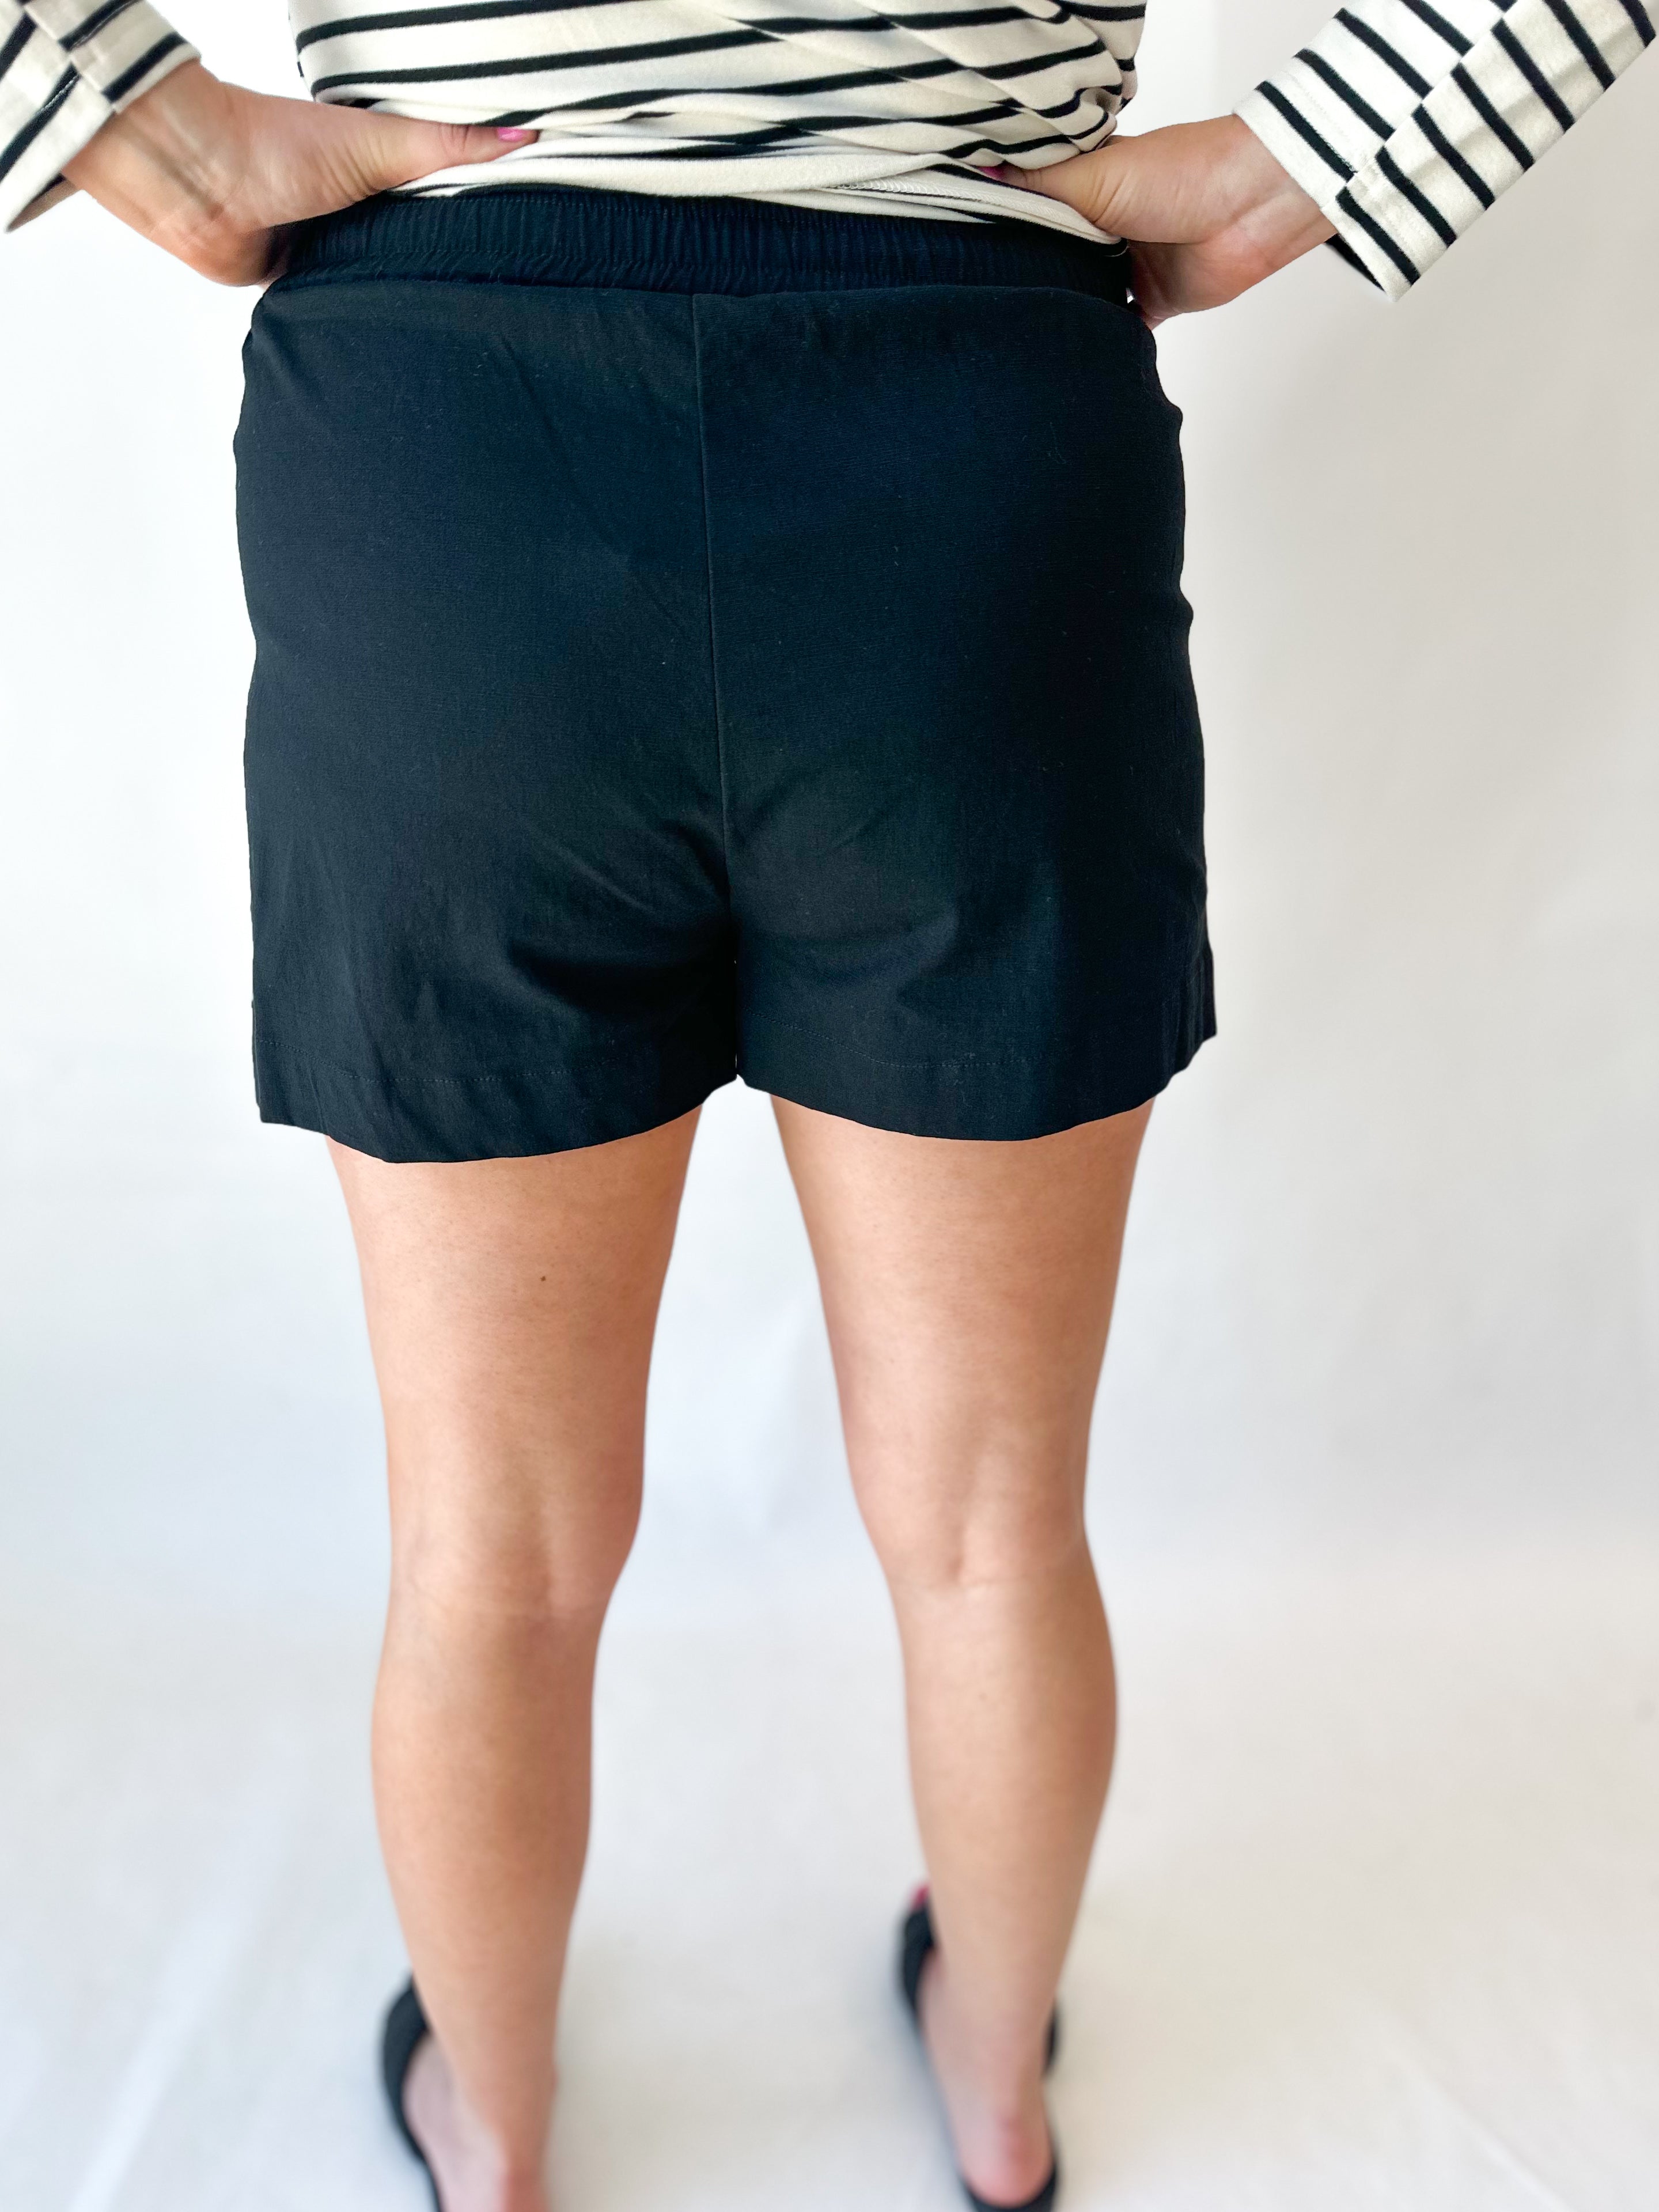 The Everyday Short - Black-410 Shorts/Skirts-ENTRO-July & June Women's Fashion Boutique Located in San Antonio, Texas